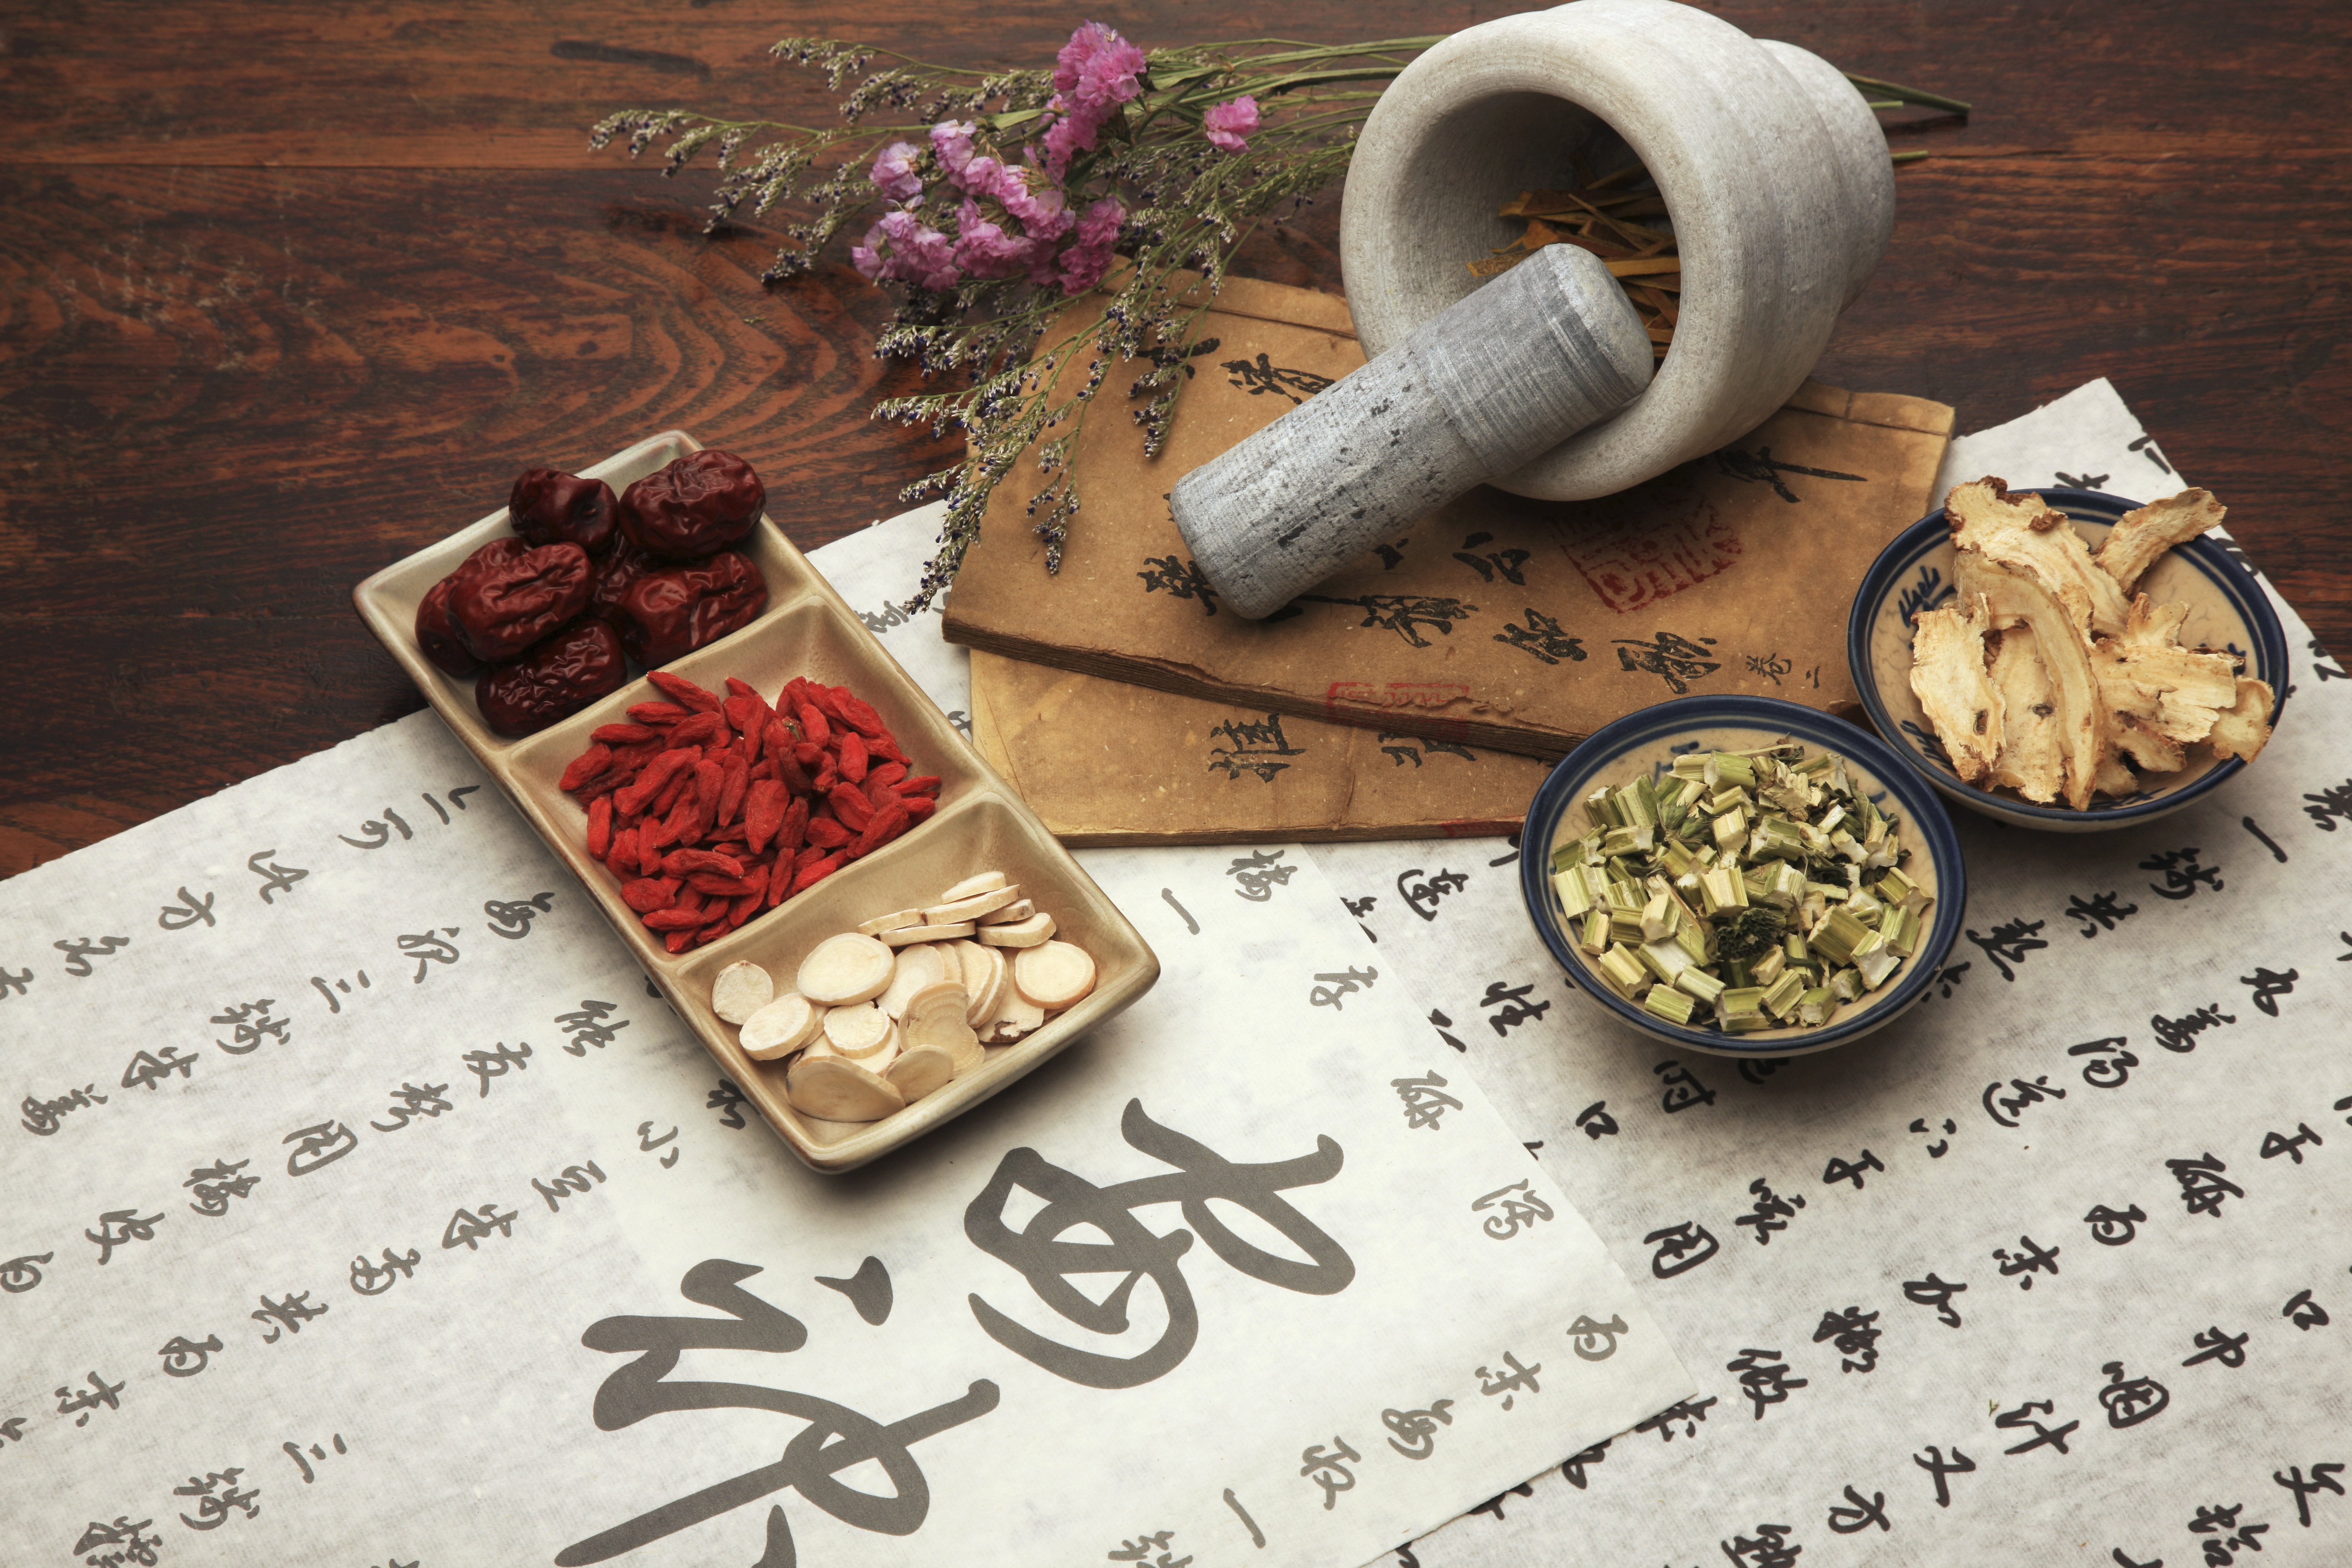 Chinese herb bioactive ingredient shows real anti-cancer benefits